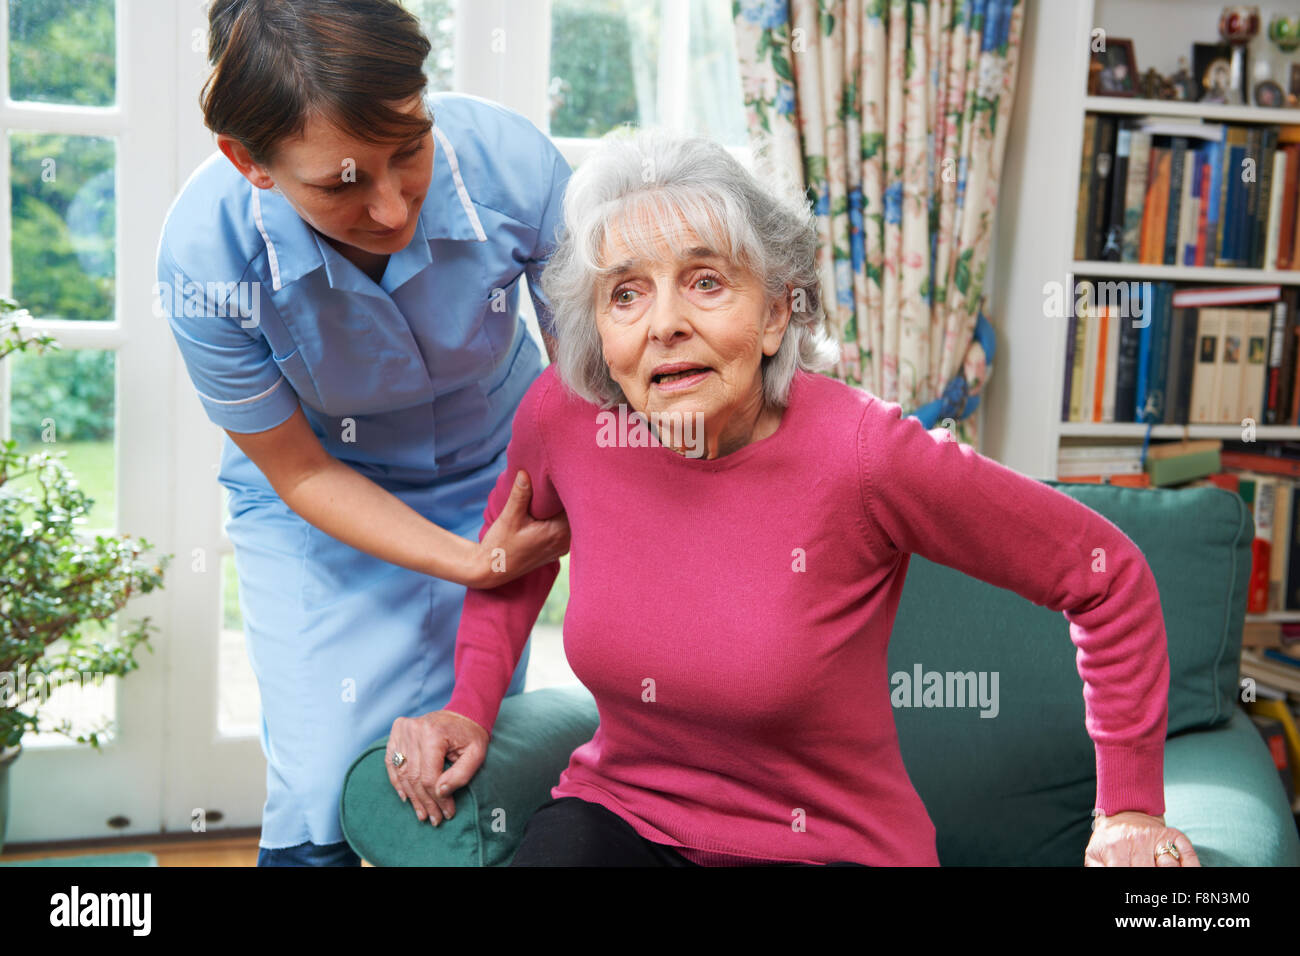 Carer Helping Senior Woman Out Of Chair Stock Photo